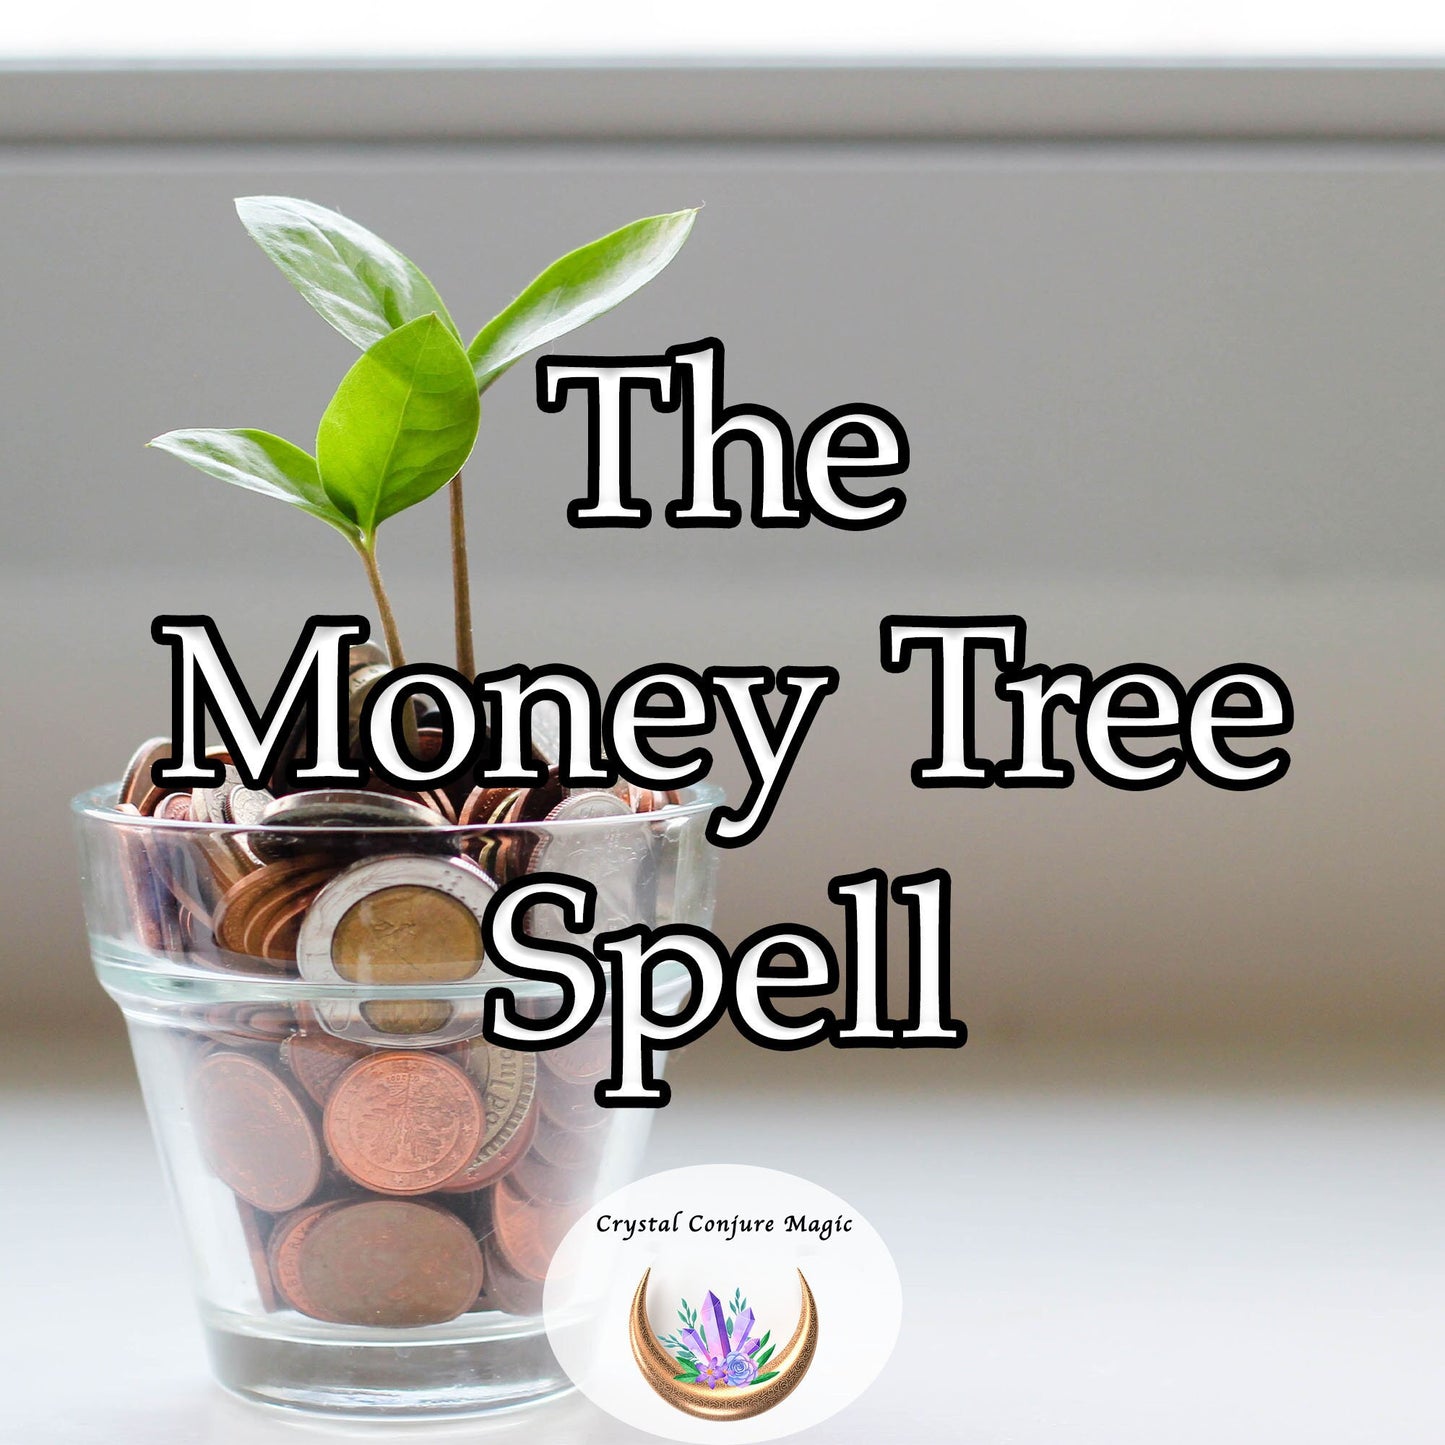 The Money Tree Spell - Financial freedom Peace of Mind Keep Cash Manifest Money Gain Financial Freedom